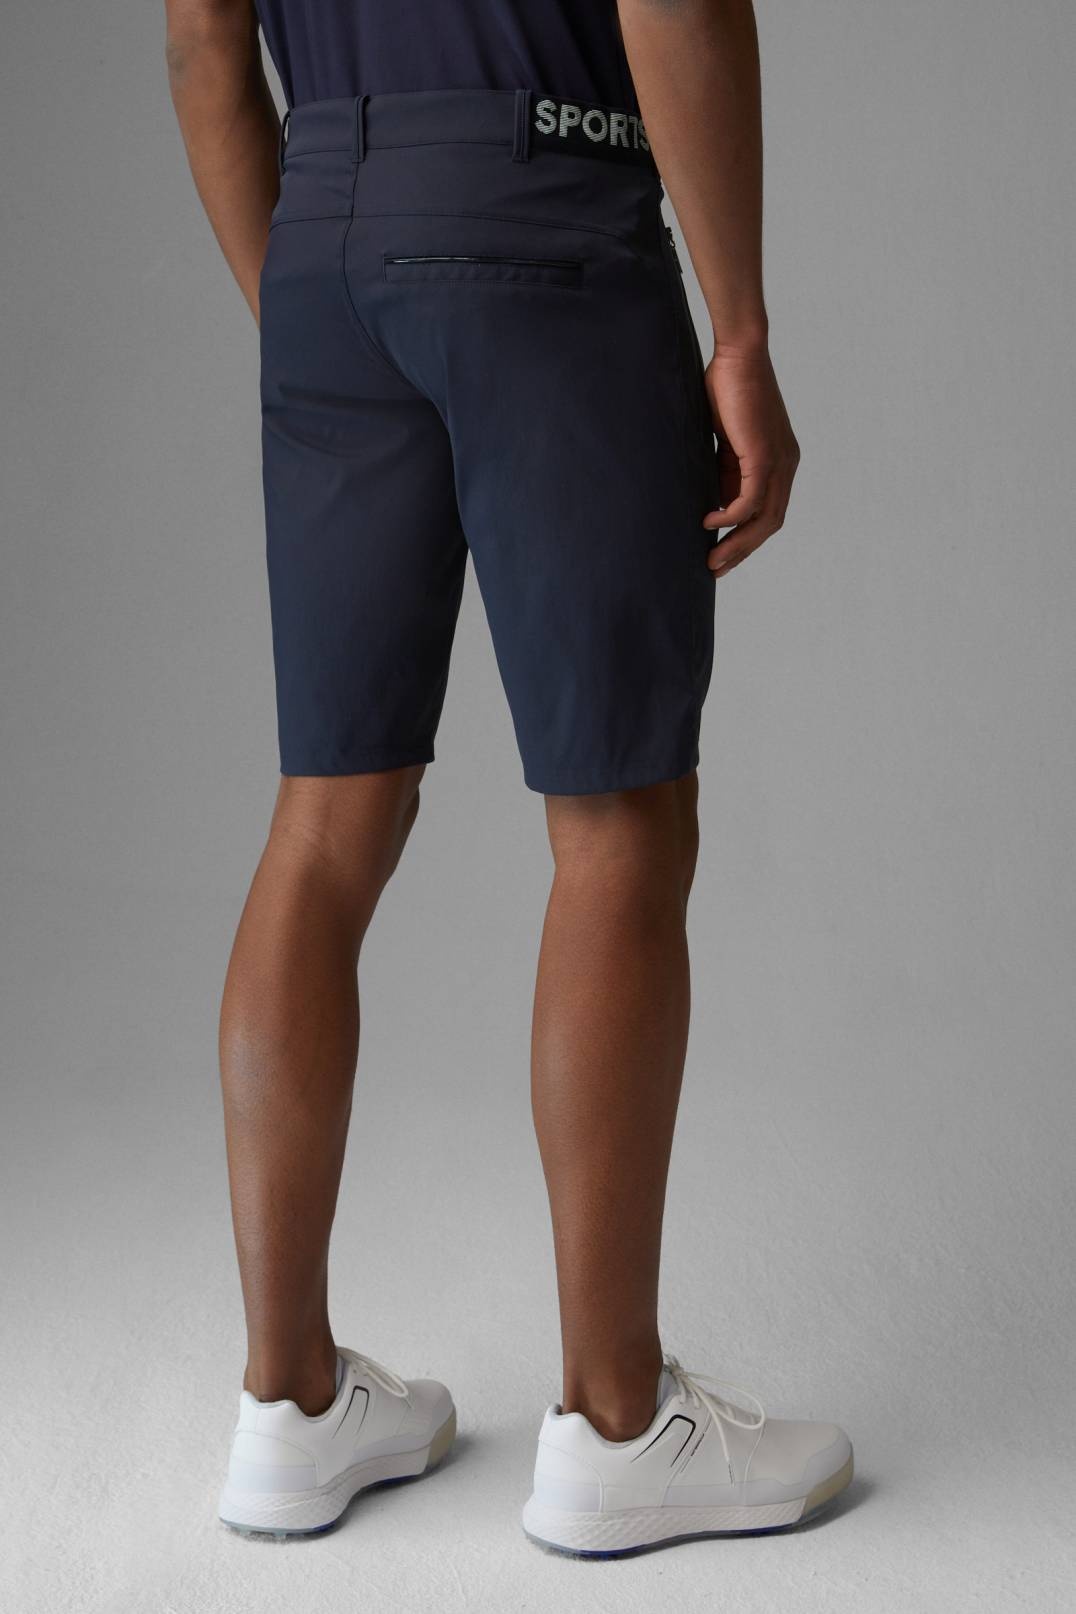 COLVIN FUNCTIONAL SHORTS IN NAVY BLUE - 3